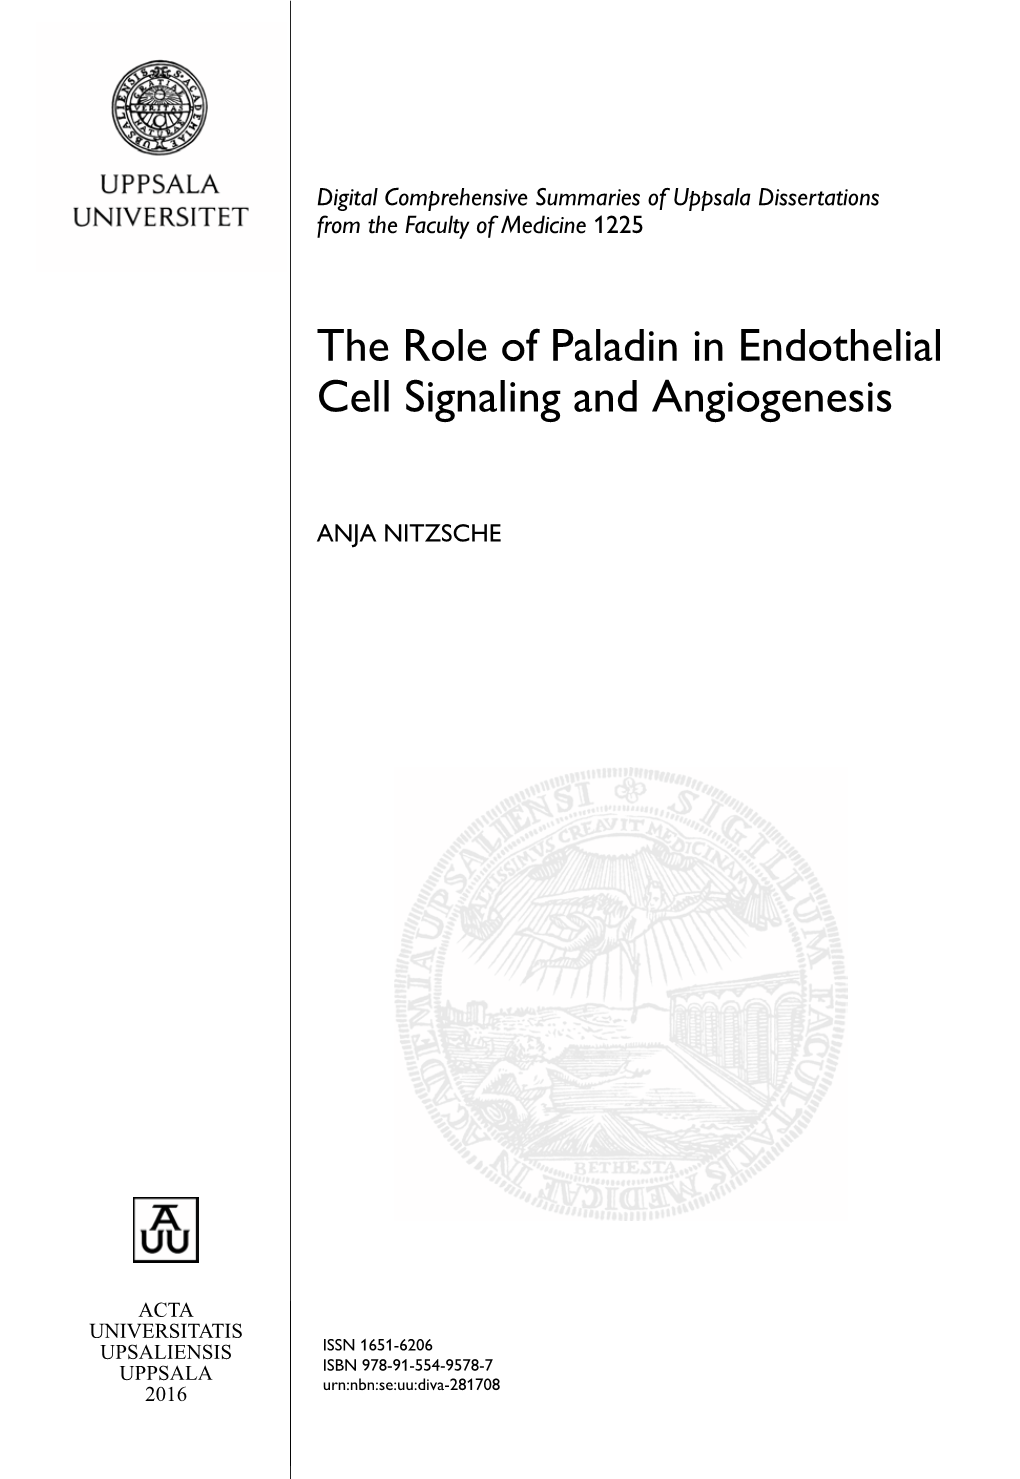 The Role of Paladin in Endothelial Cell Signaling and Angiogenesis